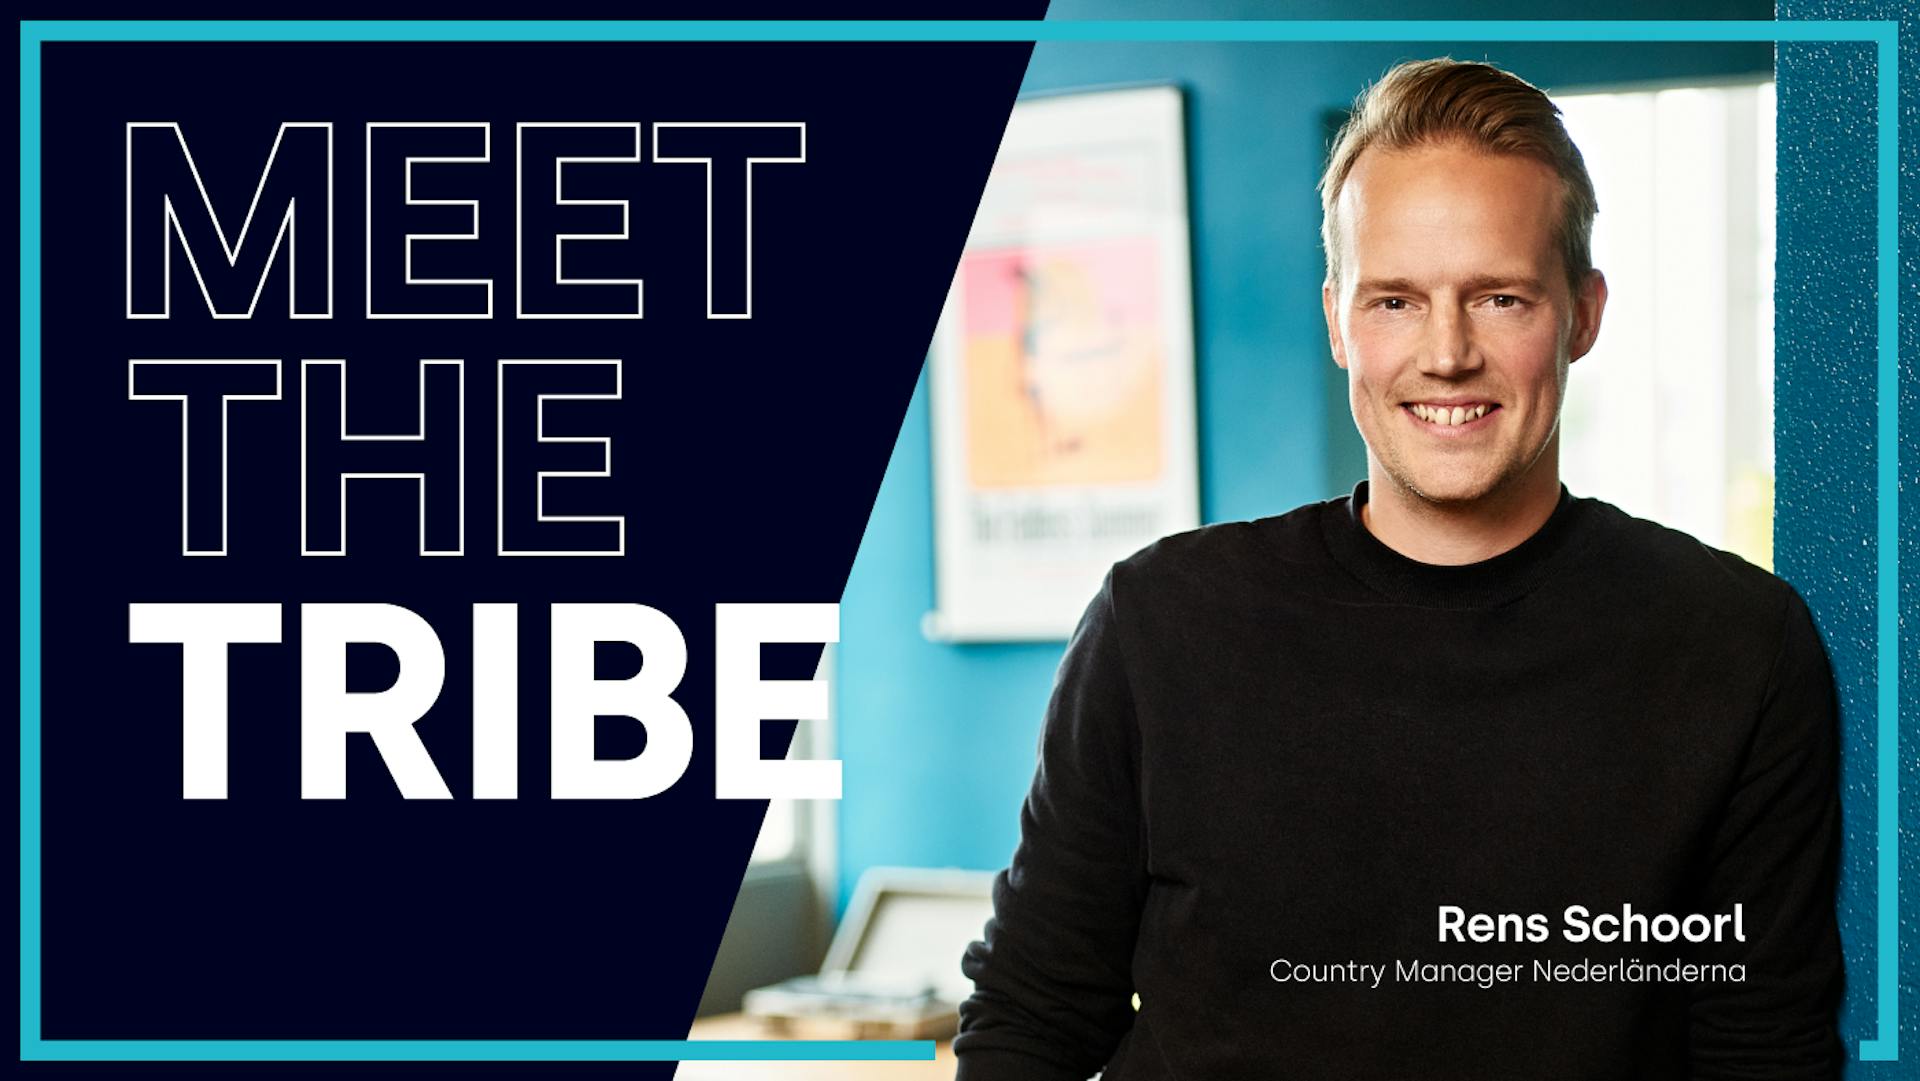 Meet the Tribe: Rens